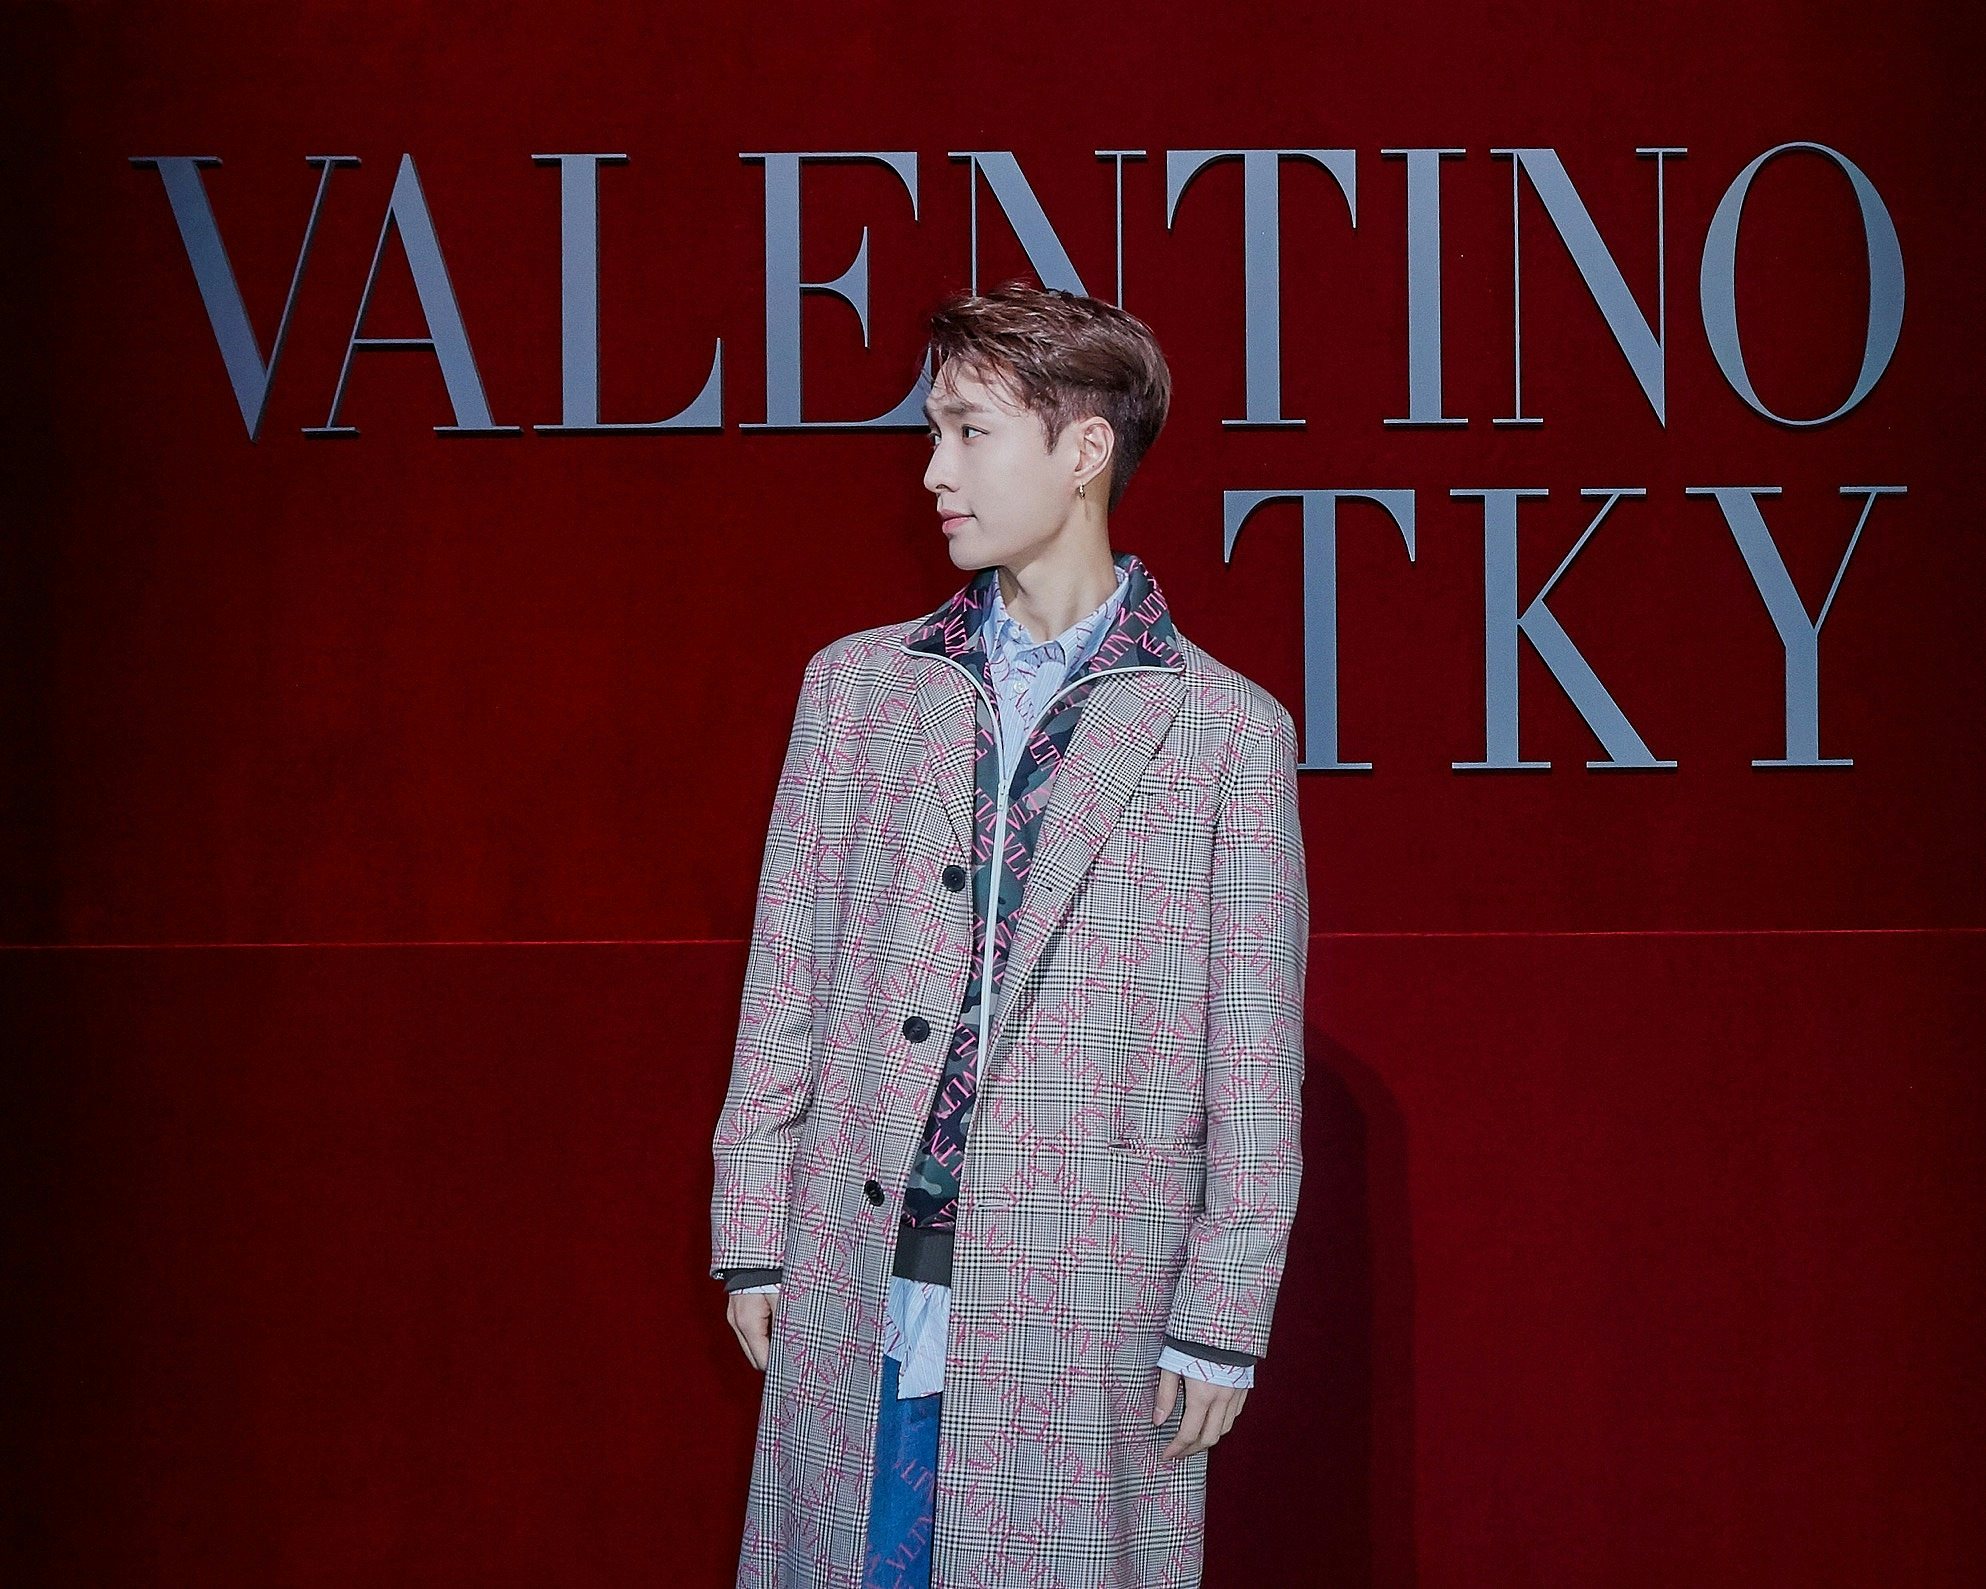 Italian high fashion brand Valentino named Zhang Yixing, the Chinese singer with a massive online following, to be its brand ambassador for menswear. Photo: VCG